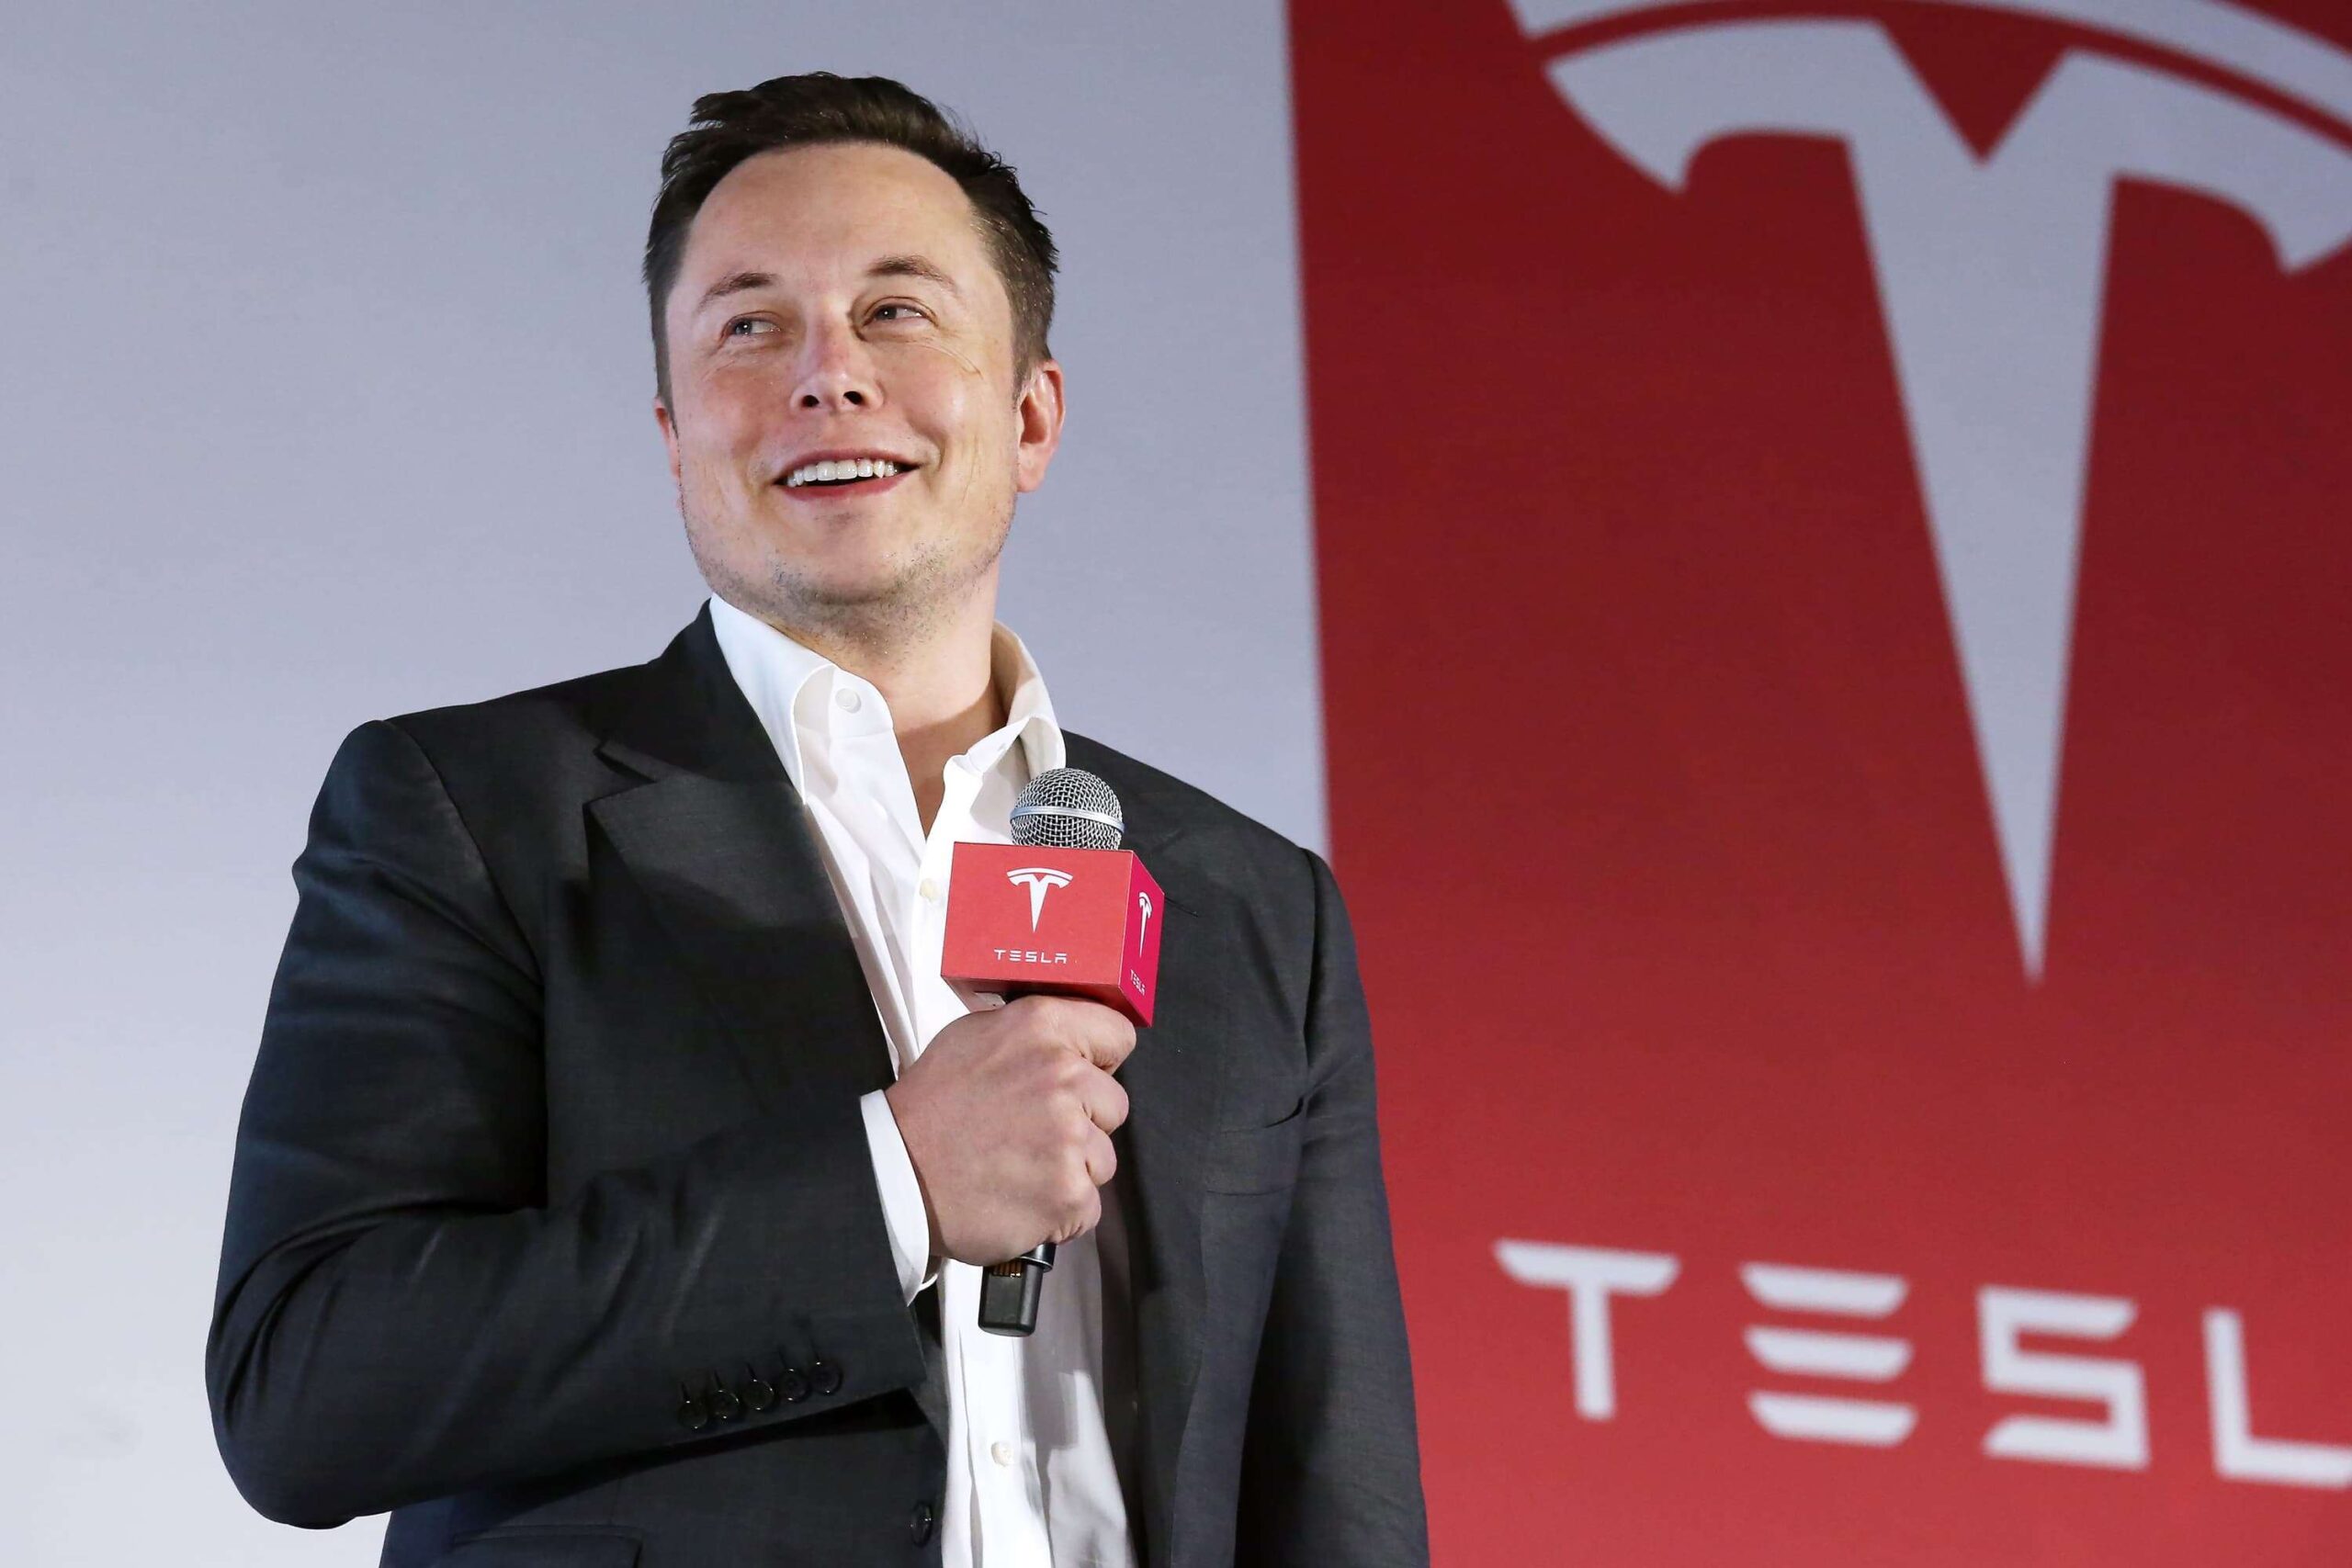 As a bridge to renewable energy, Elon Musk says the world needs more oil and gas.